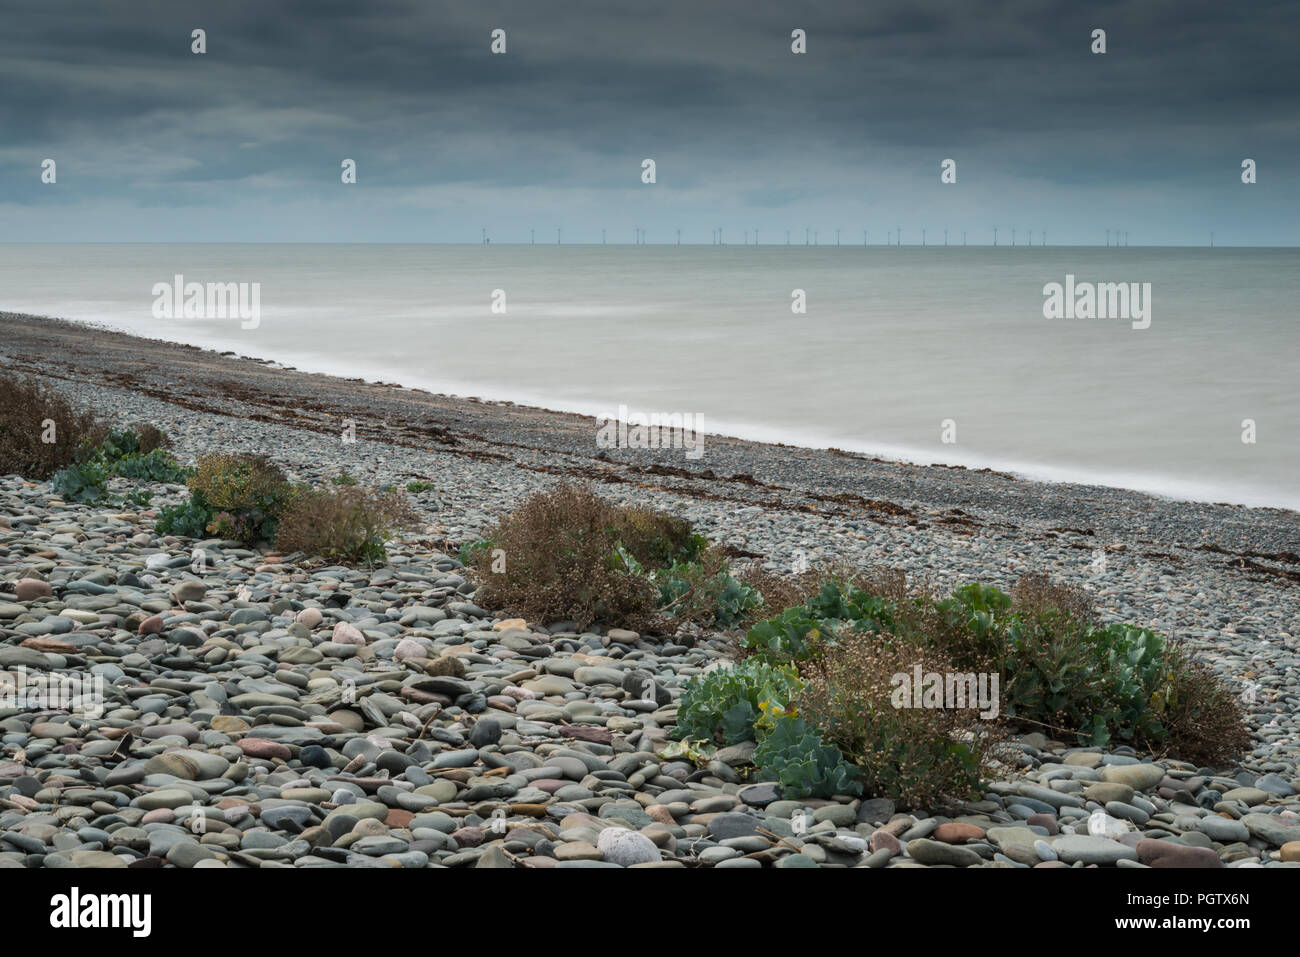 The deserted western shoreline and beach of Walney Island off the Cumbrian coast in summer with long exposure on the sea and shingle beach. Stock Photo